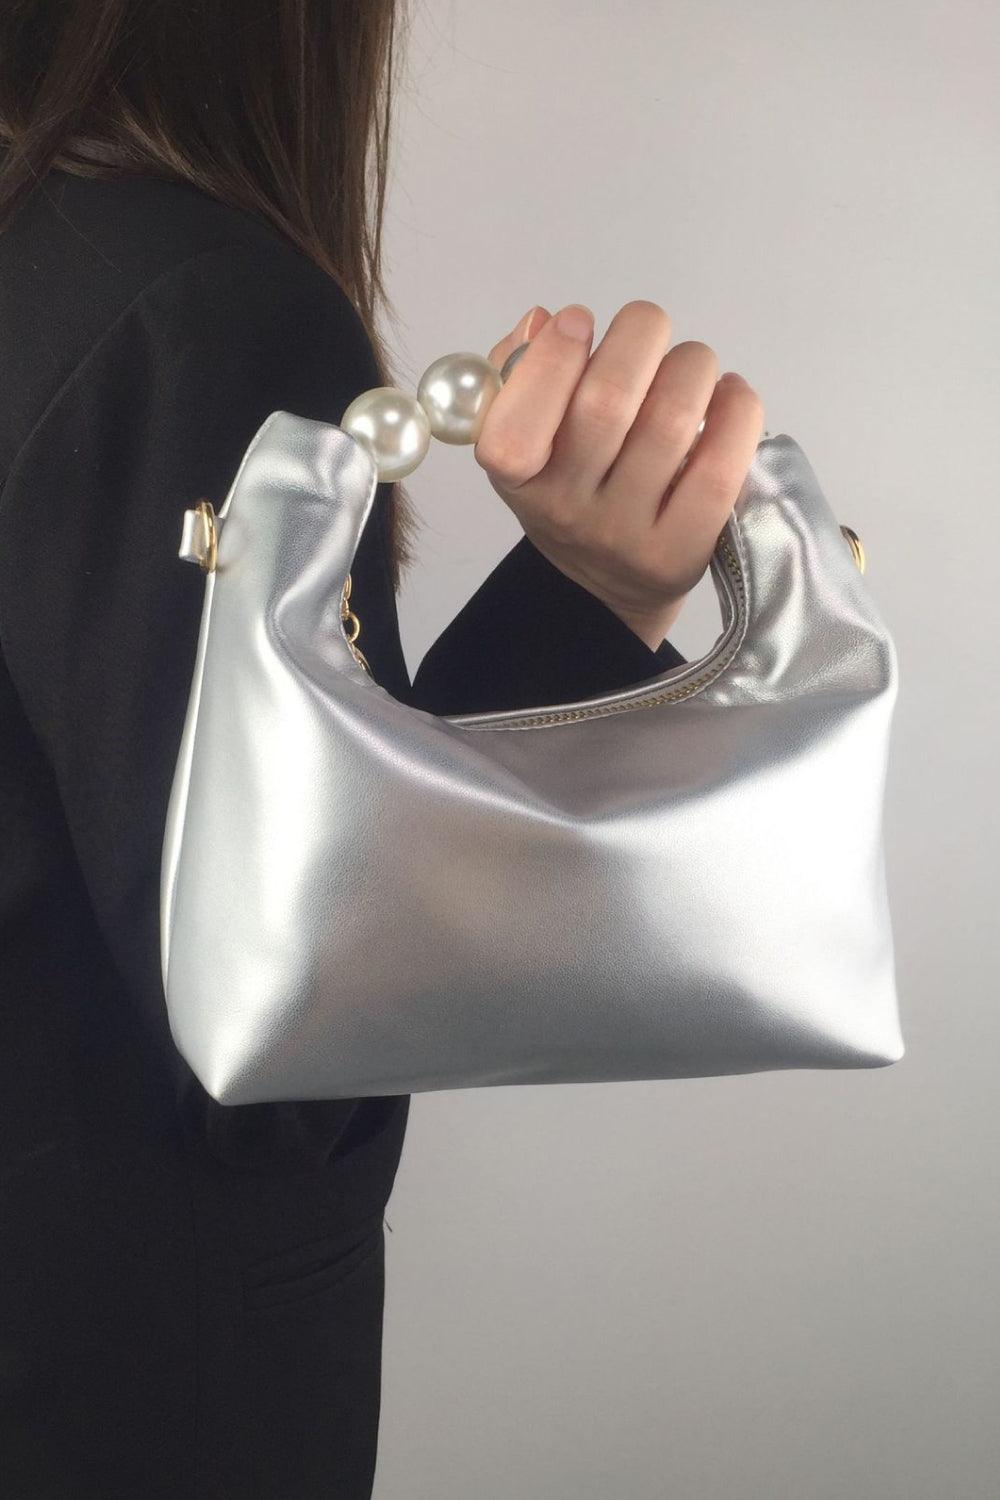 Adored PU Leather Pearl Handbag Silver One Size